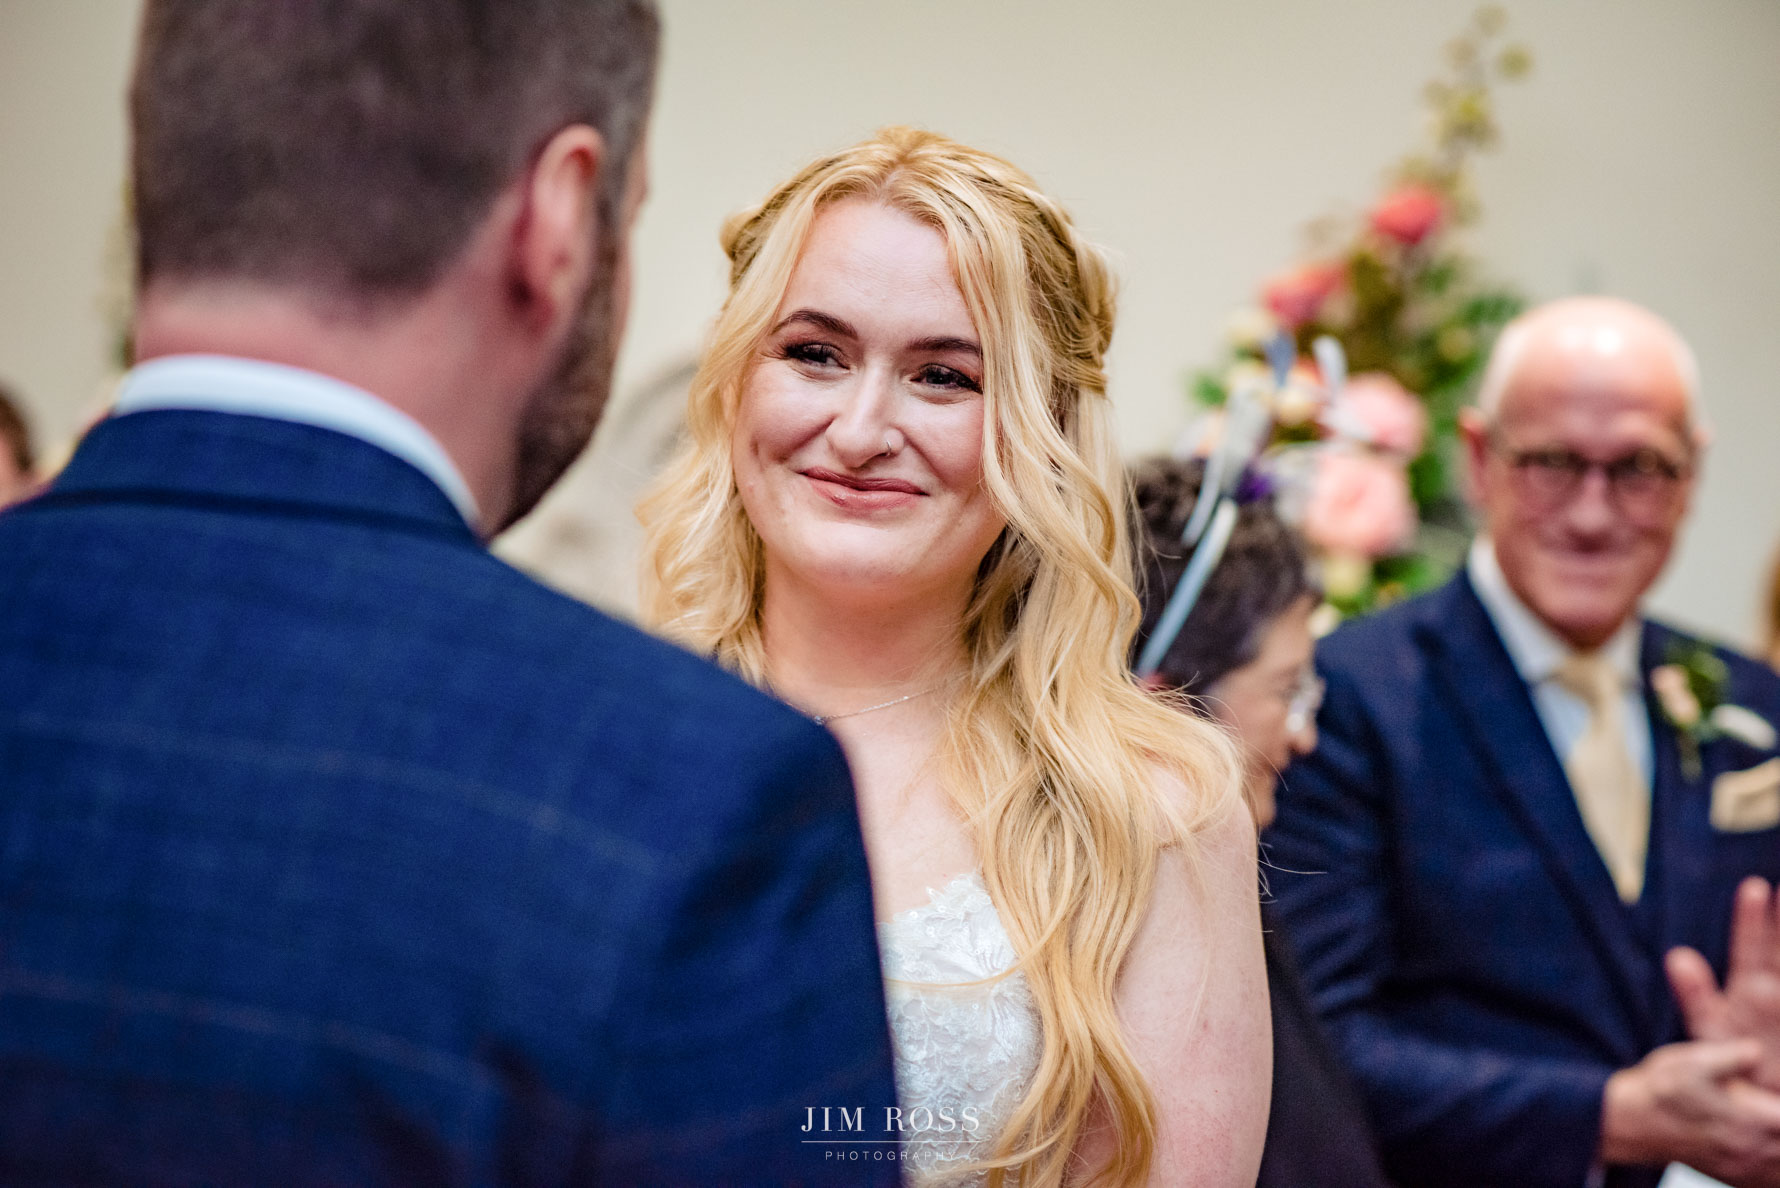 Cute smile from bride